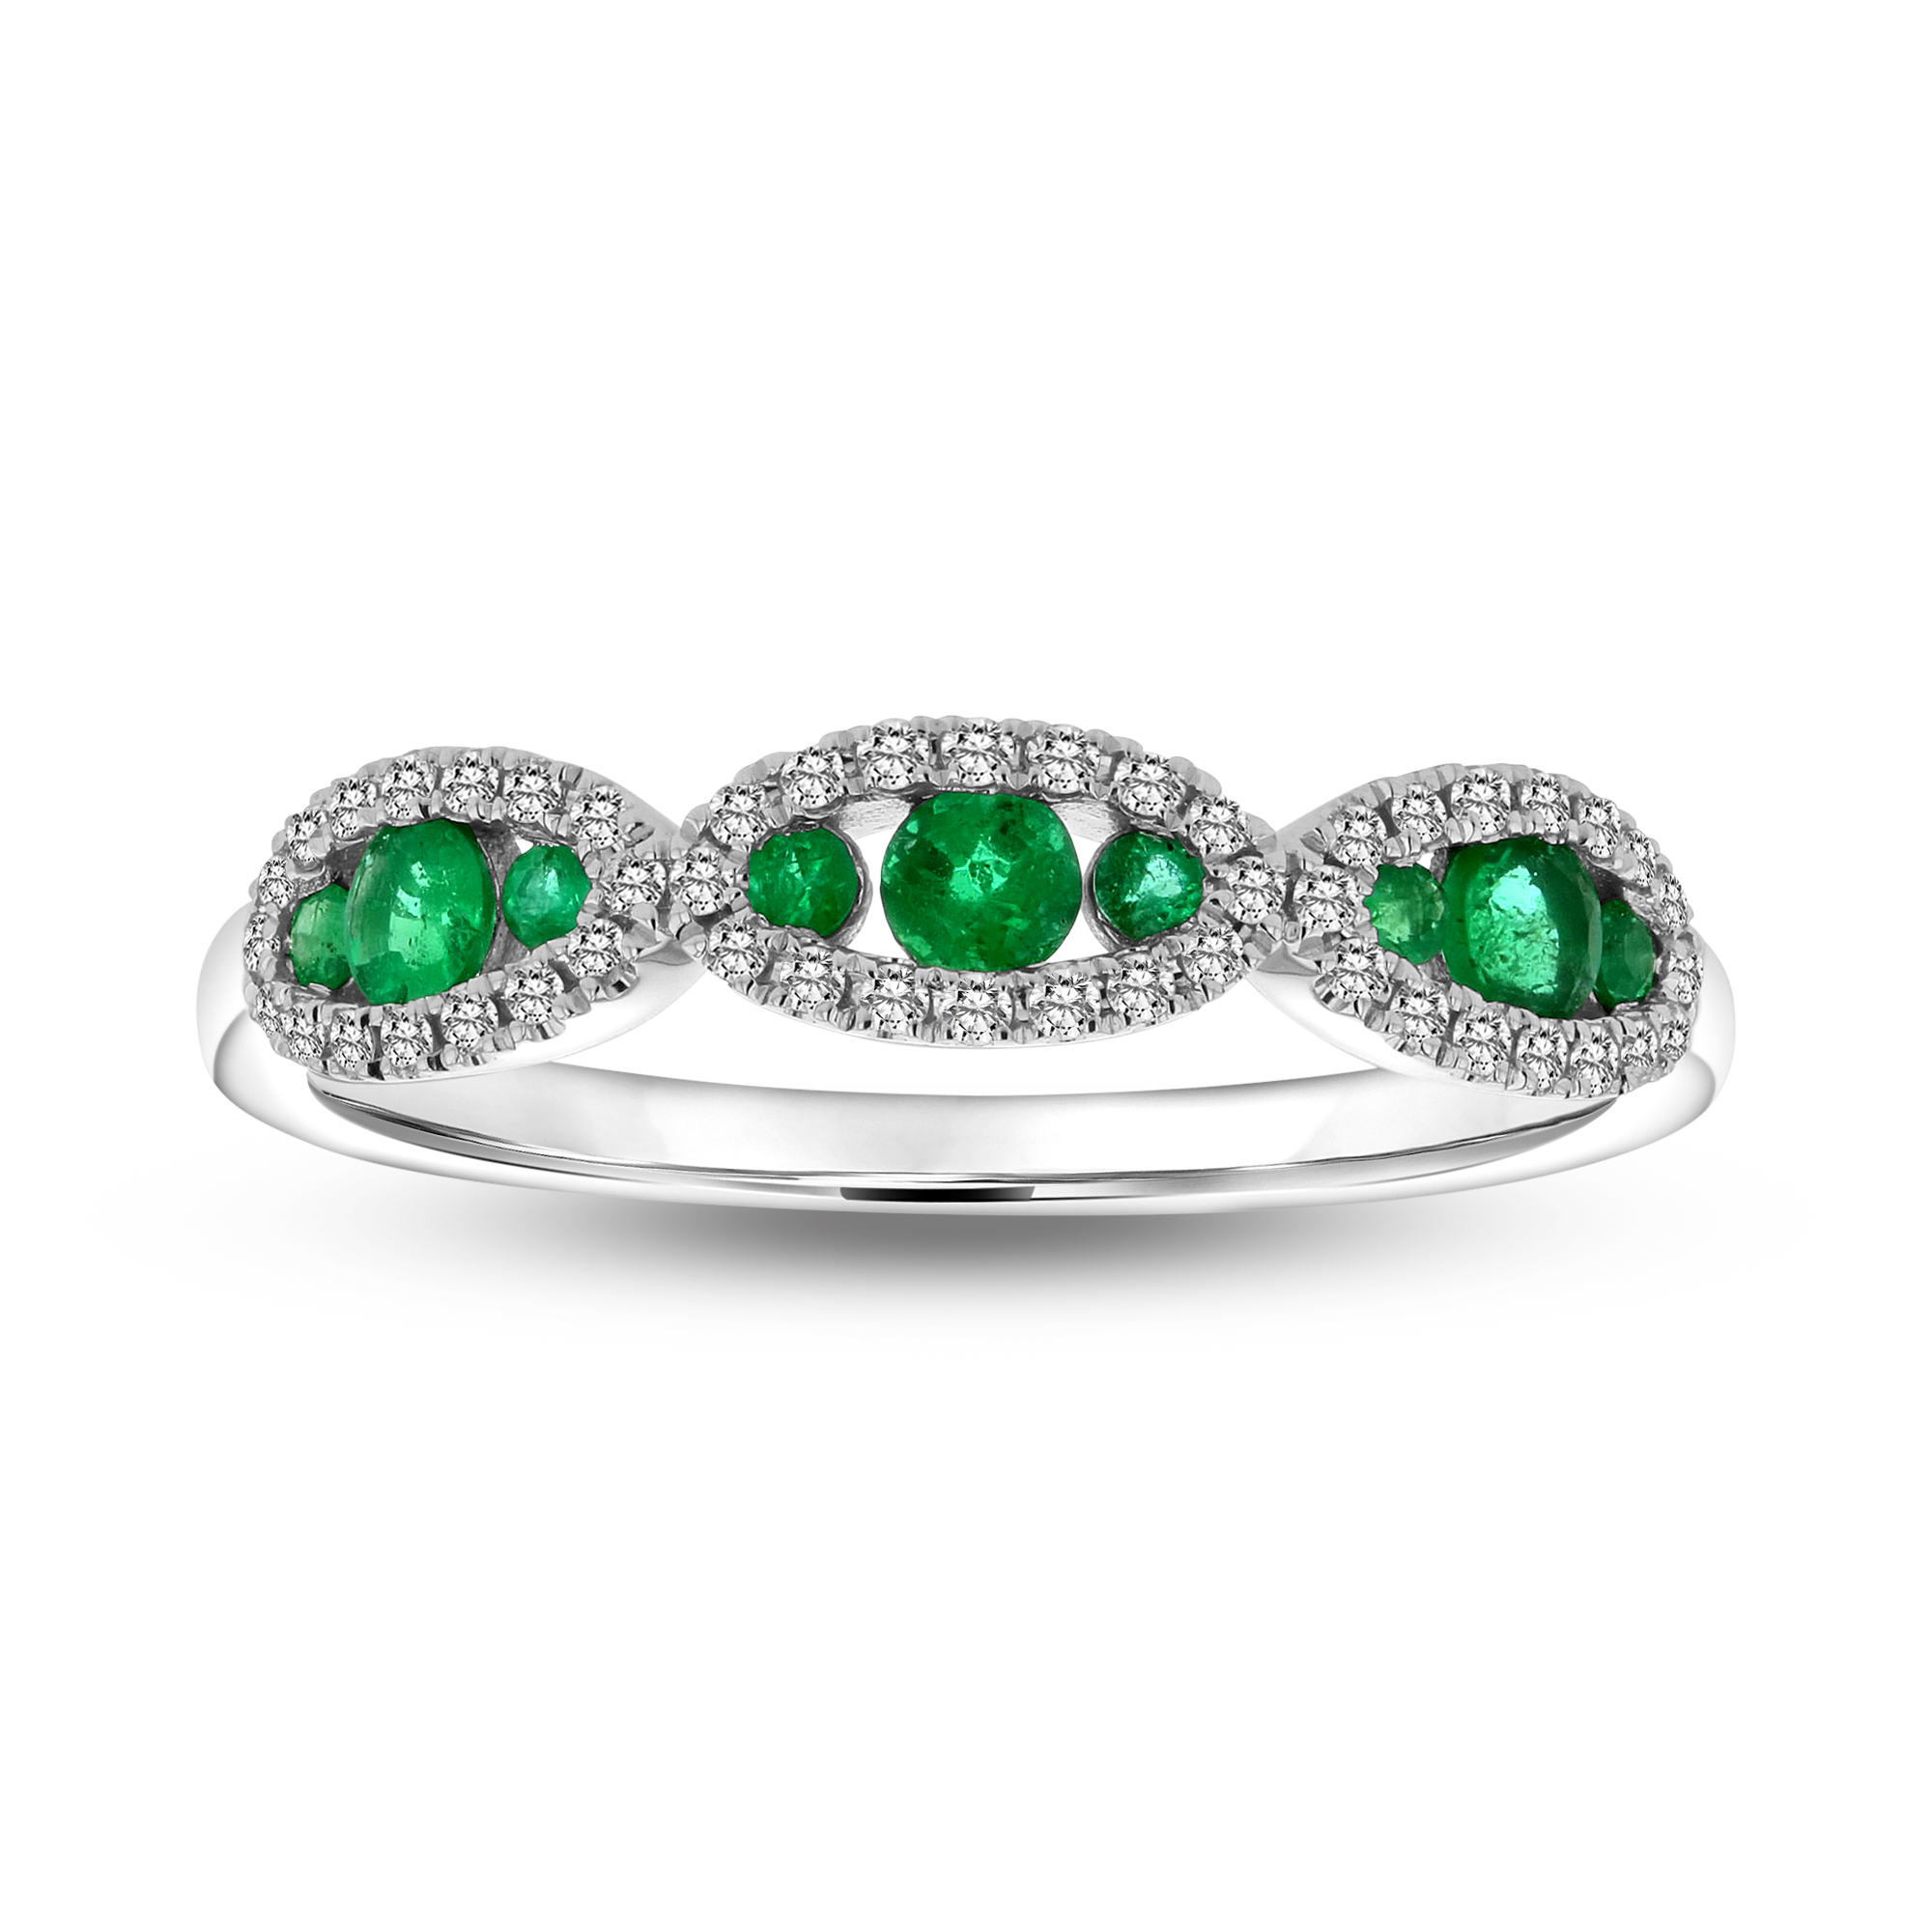 View 0.43ctw Diamond and Emerald Band in 14k White Gold